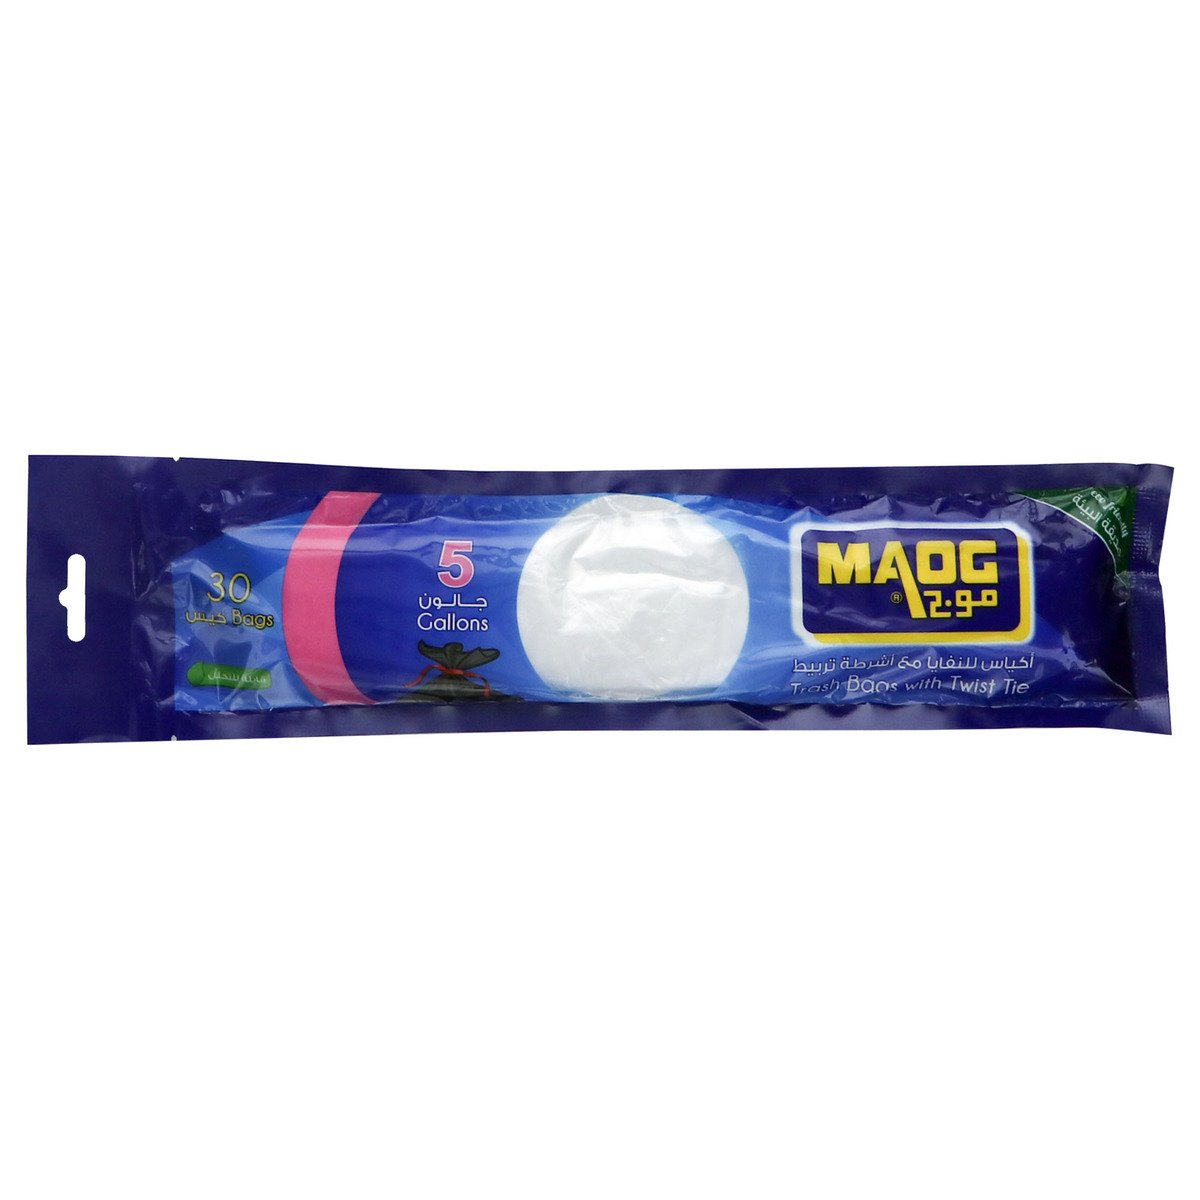 Maog Trash Bags With Twist Tie 5 Gallons 30pcs